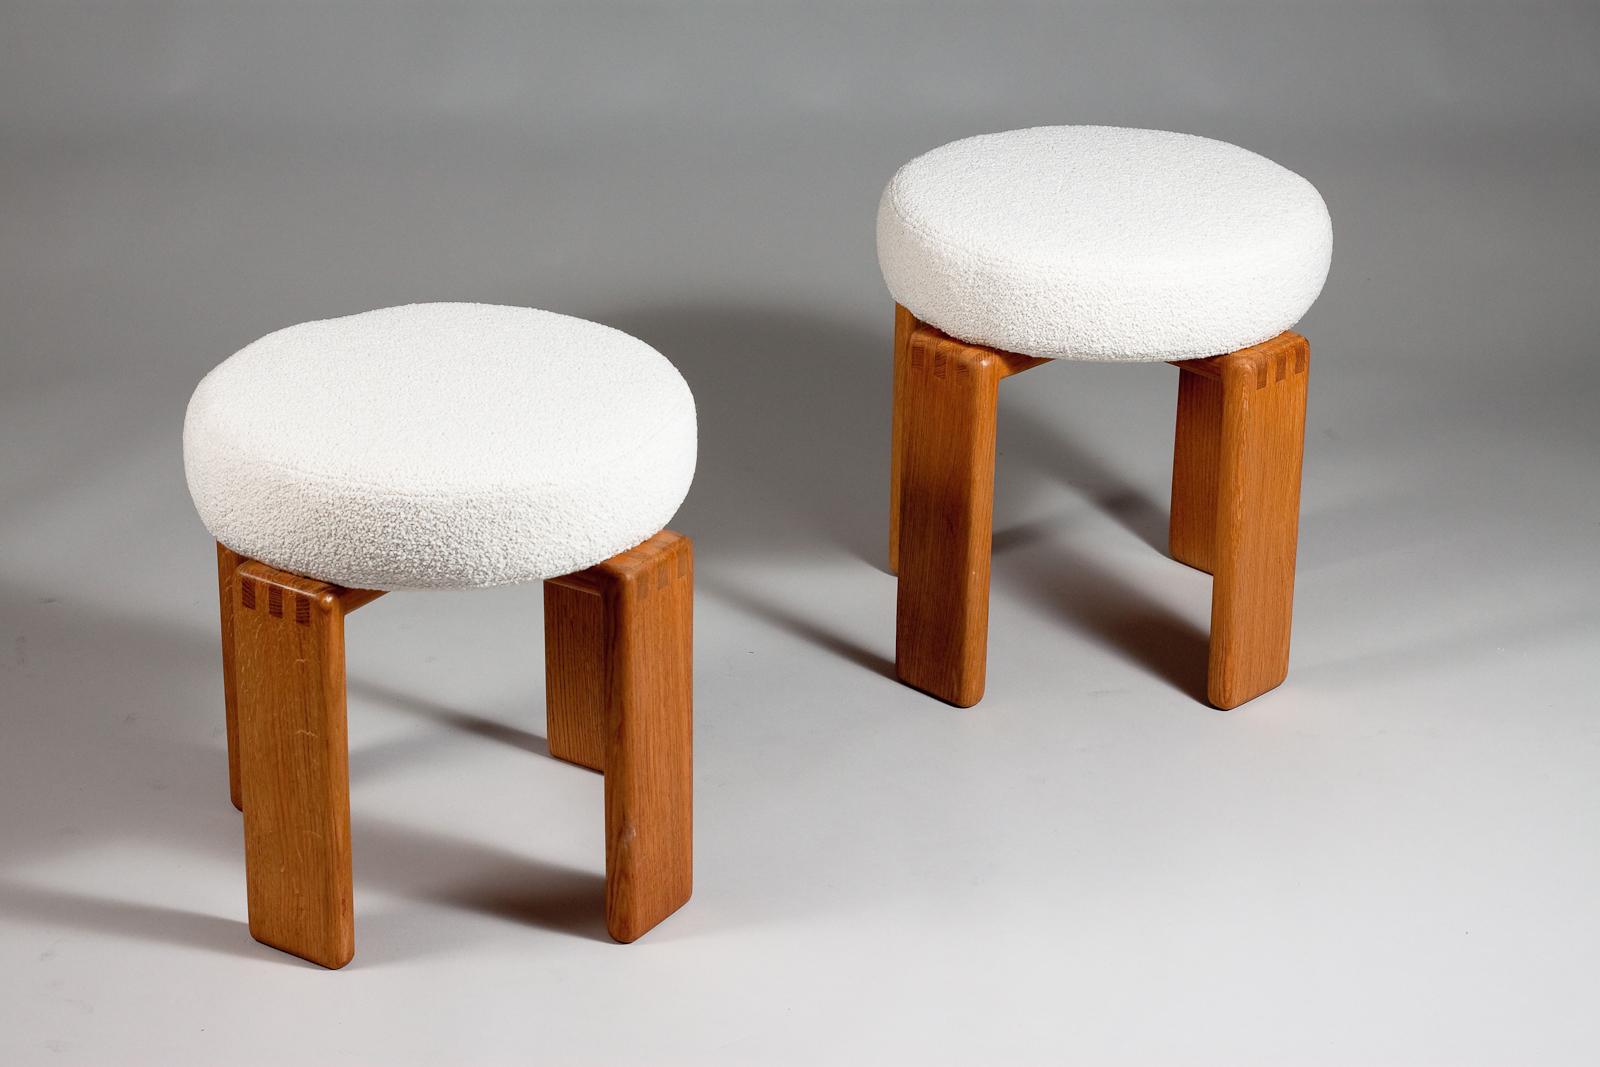 If you're seeking a timeless piece of vintage furniture with a retro vibe, look no further than this pair of 1960's Panderosa oak stools by Esko Pajamies. Crafted with sturdy teak wood and featuring a sleek and minimalist design, these stools are a